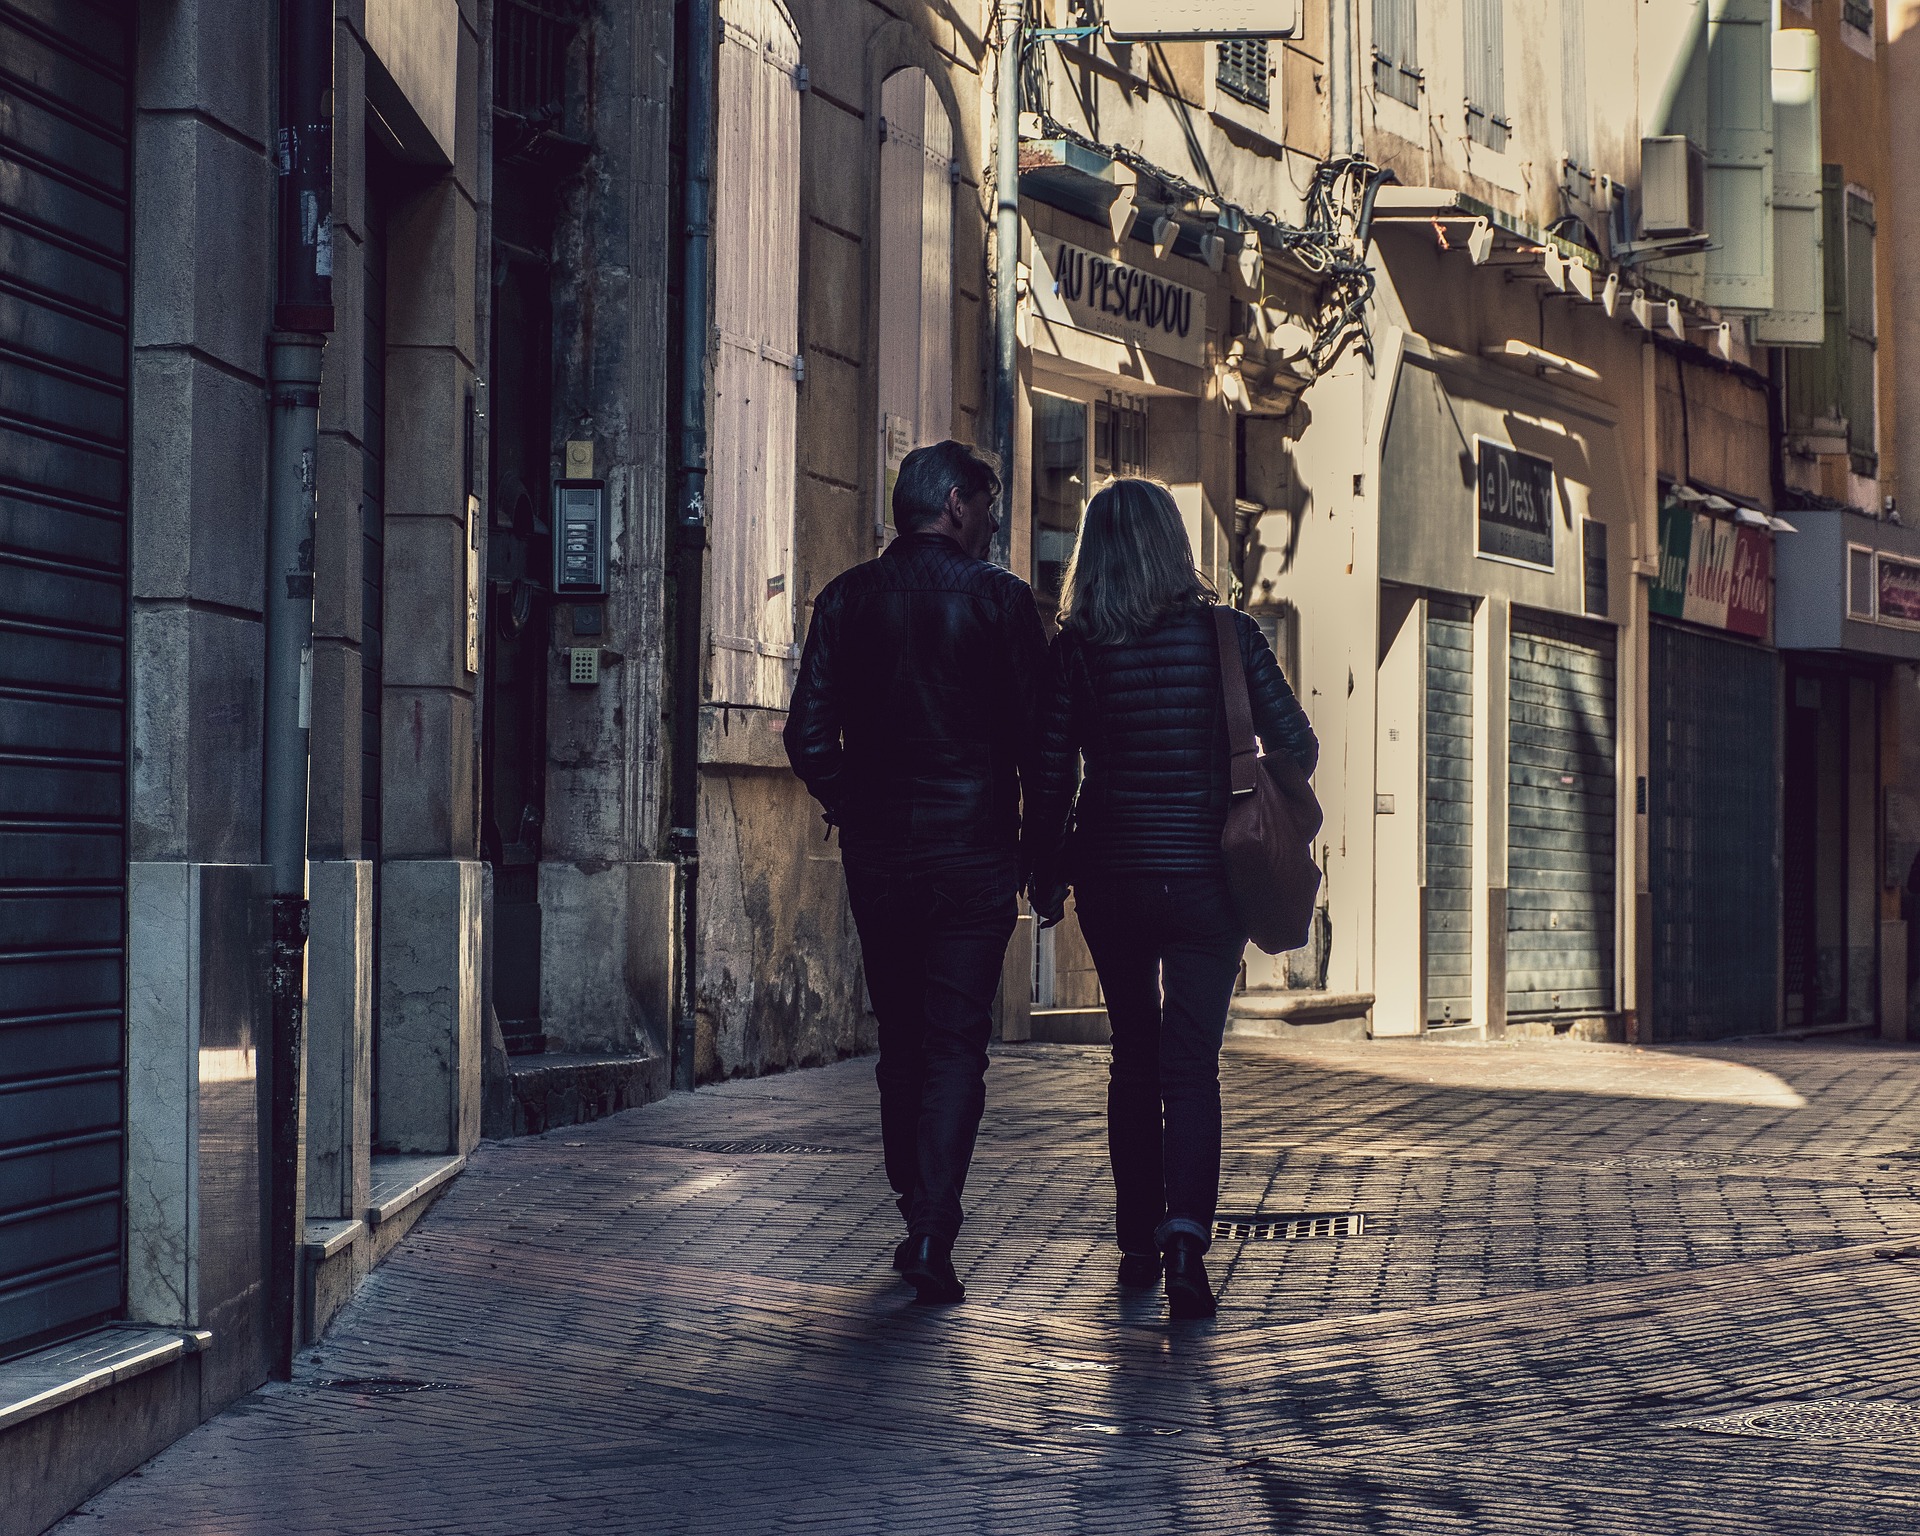 Two people walk down a cobble-stoned alleyway holding hands.